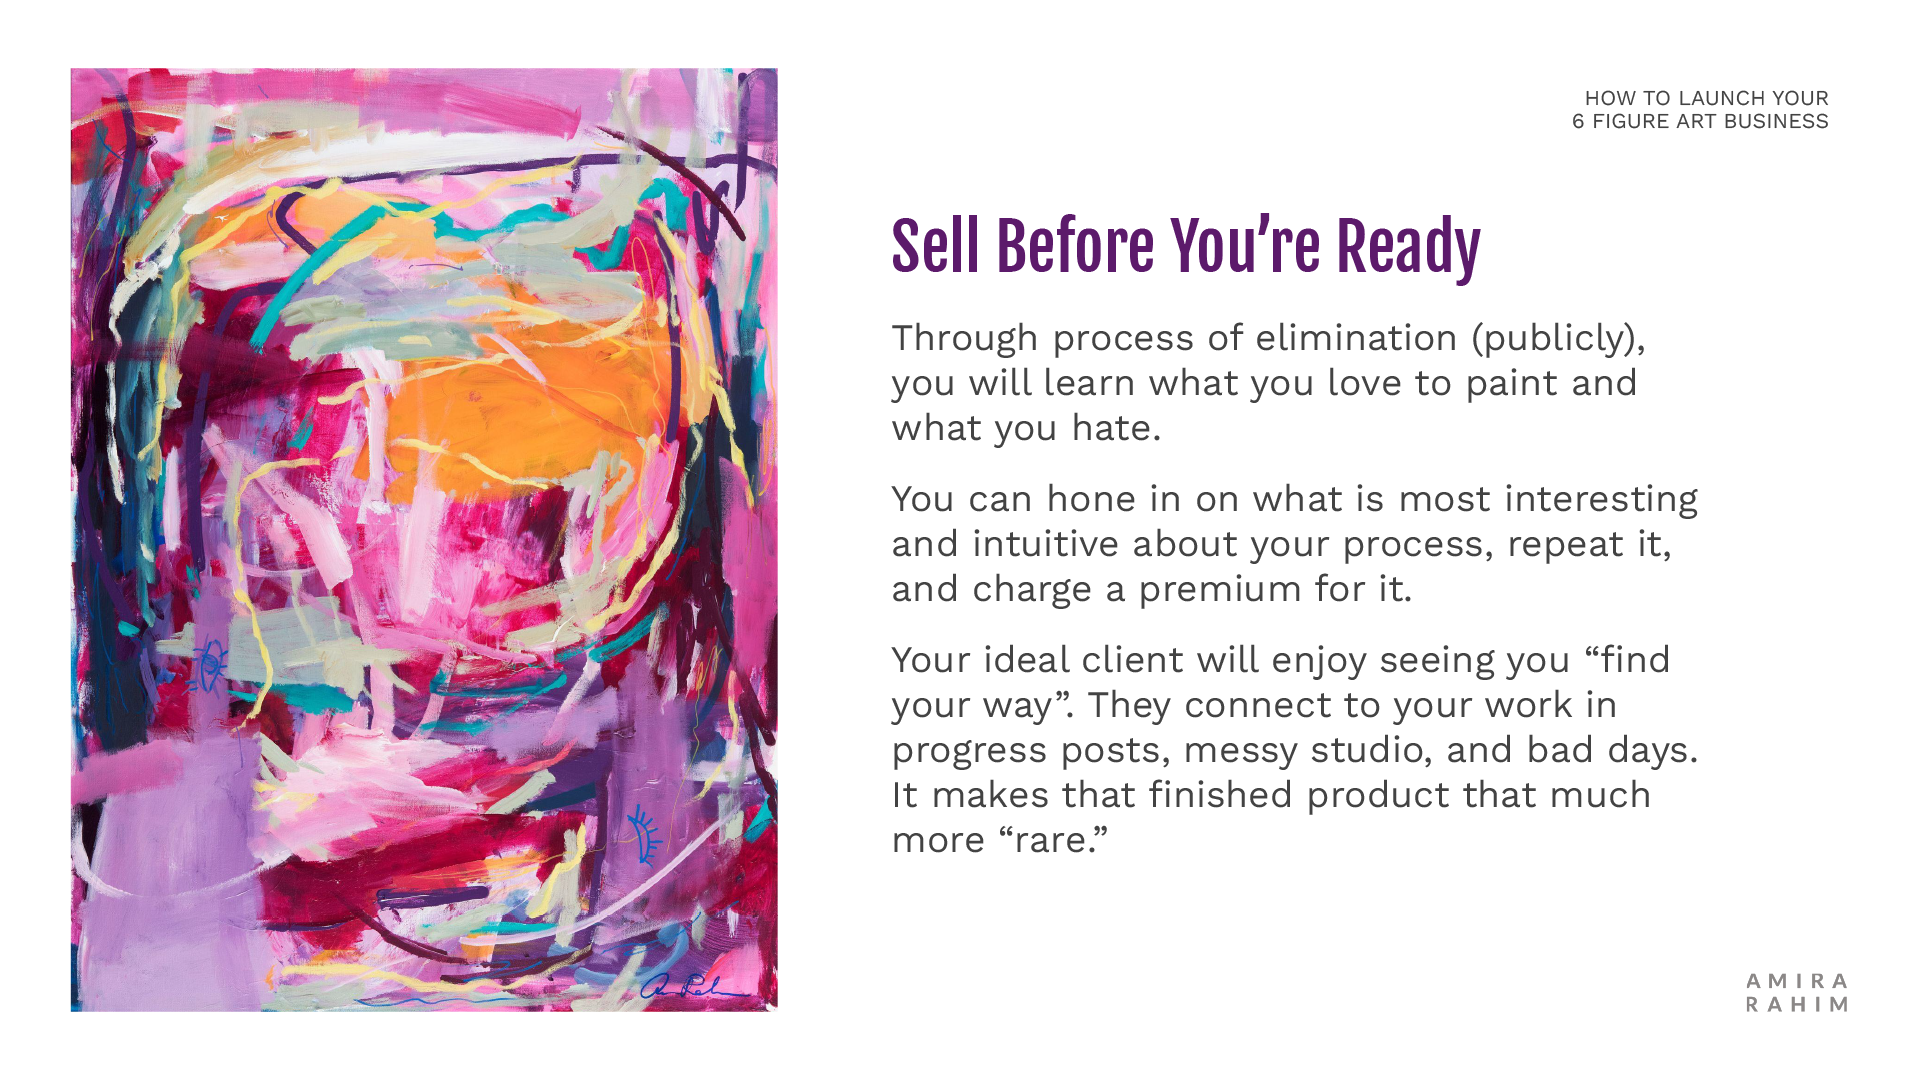 How-to-Launch-Your-6-Figure-Art-Business-13.png